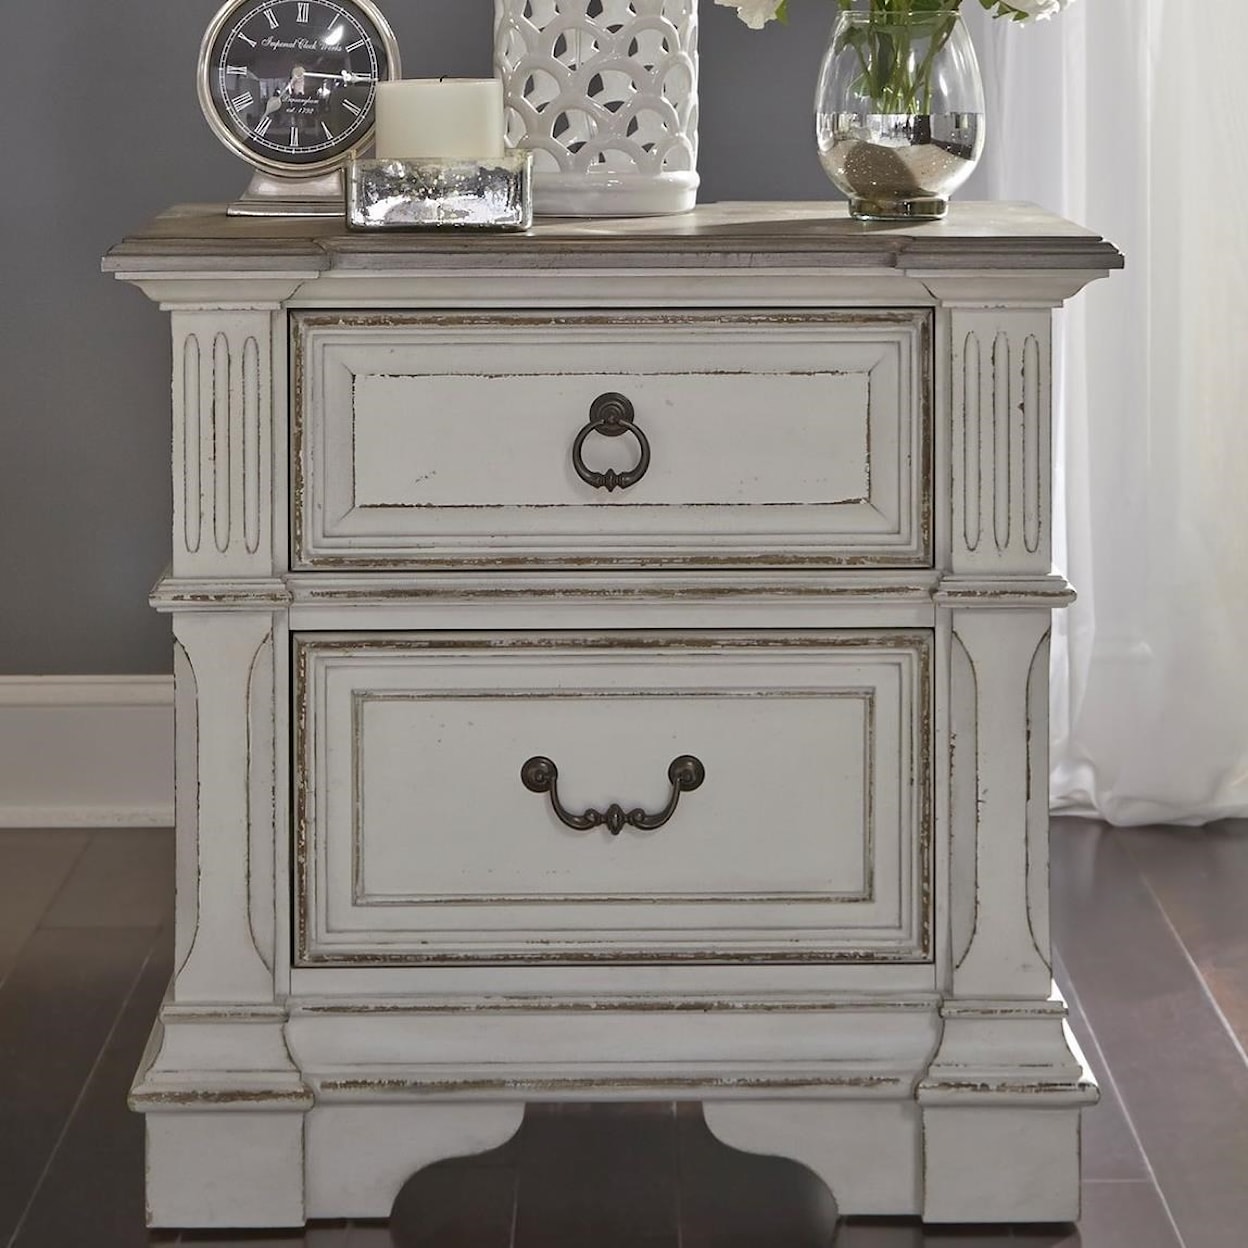 Libby Abbey Park 2-Drawer Nightstand